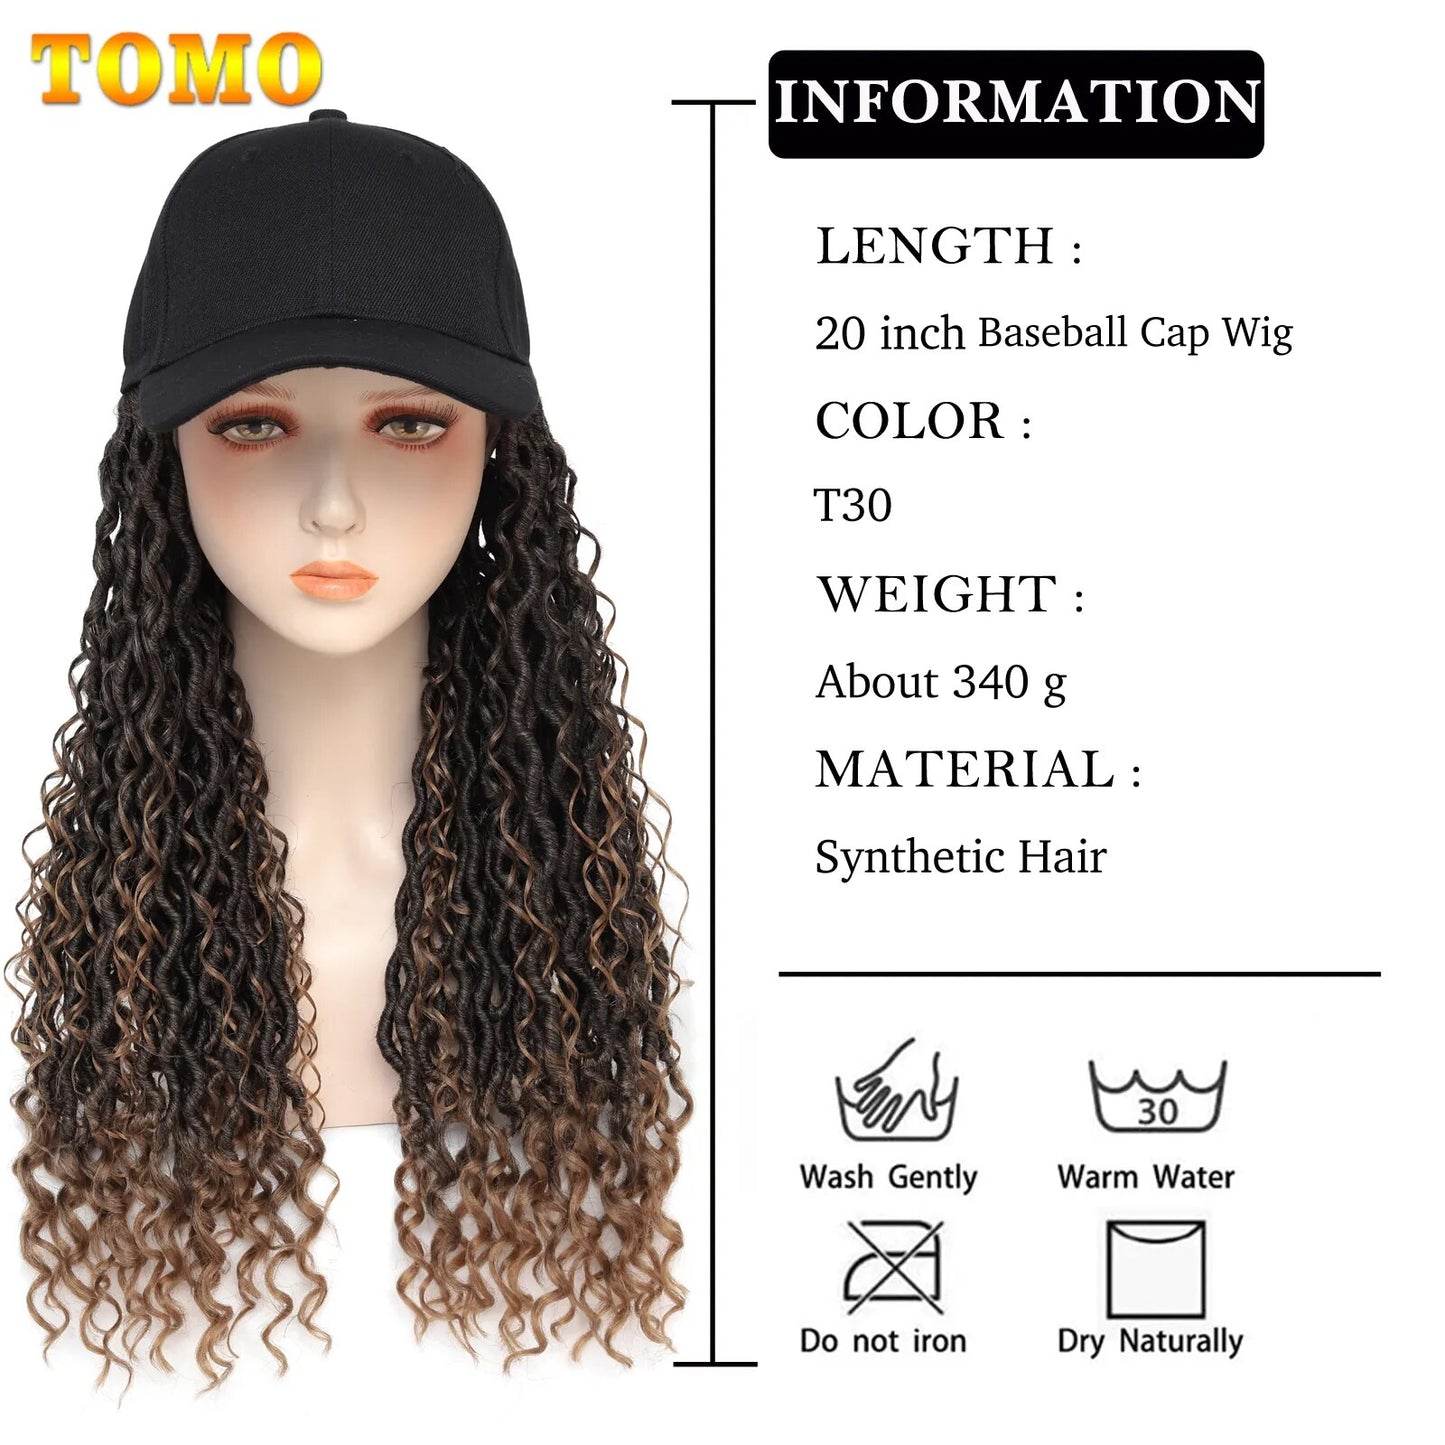 TOMO Baseball Wig Cap With Goddess River Locs Synthetic Faux Locs Crochet Hair Adjustable Cap Hat With Passion Twist Braids 20"